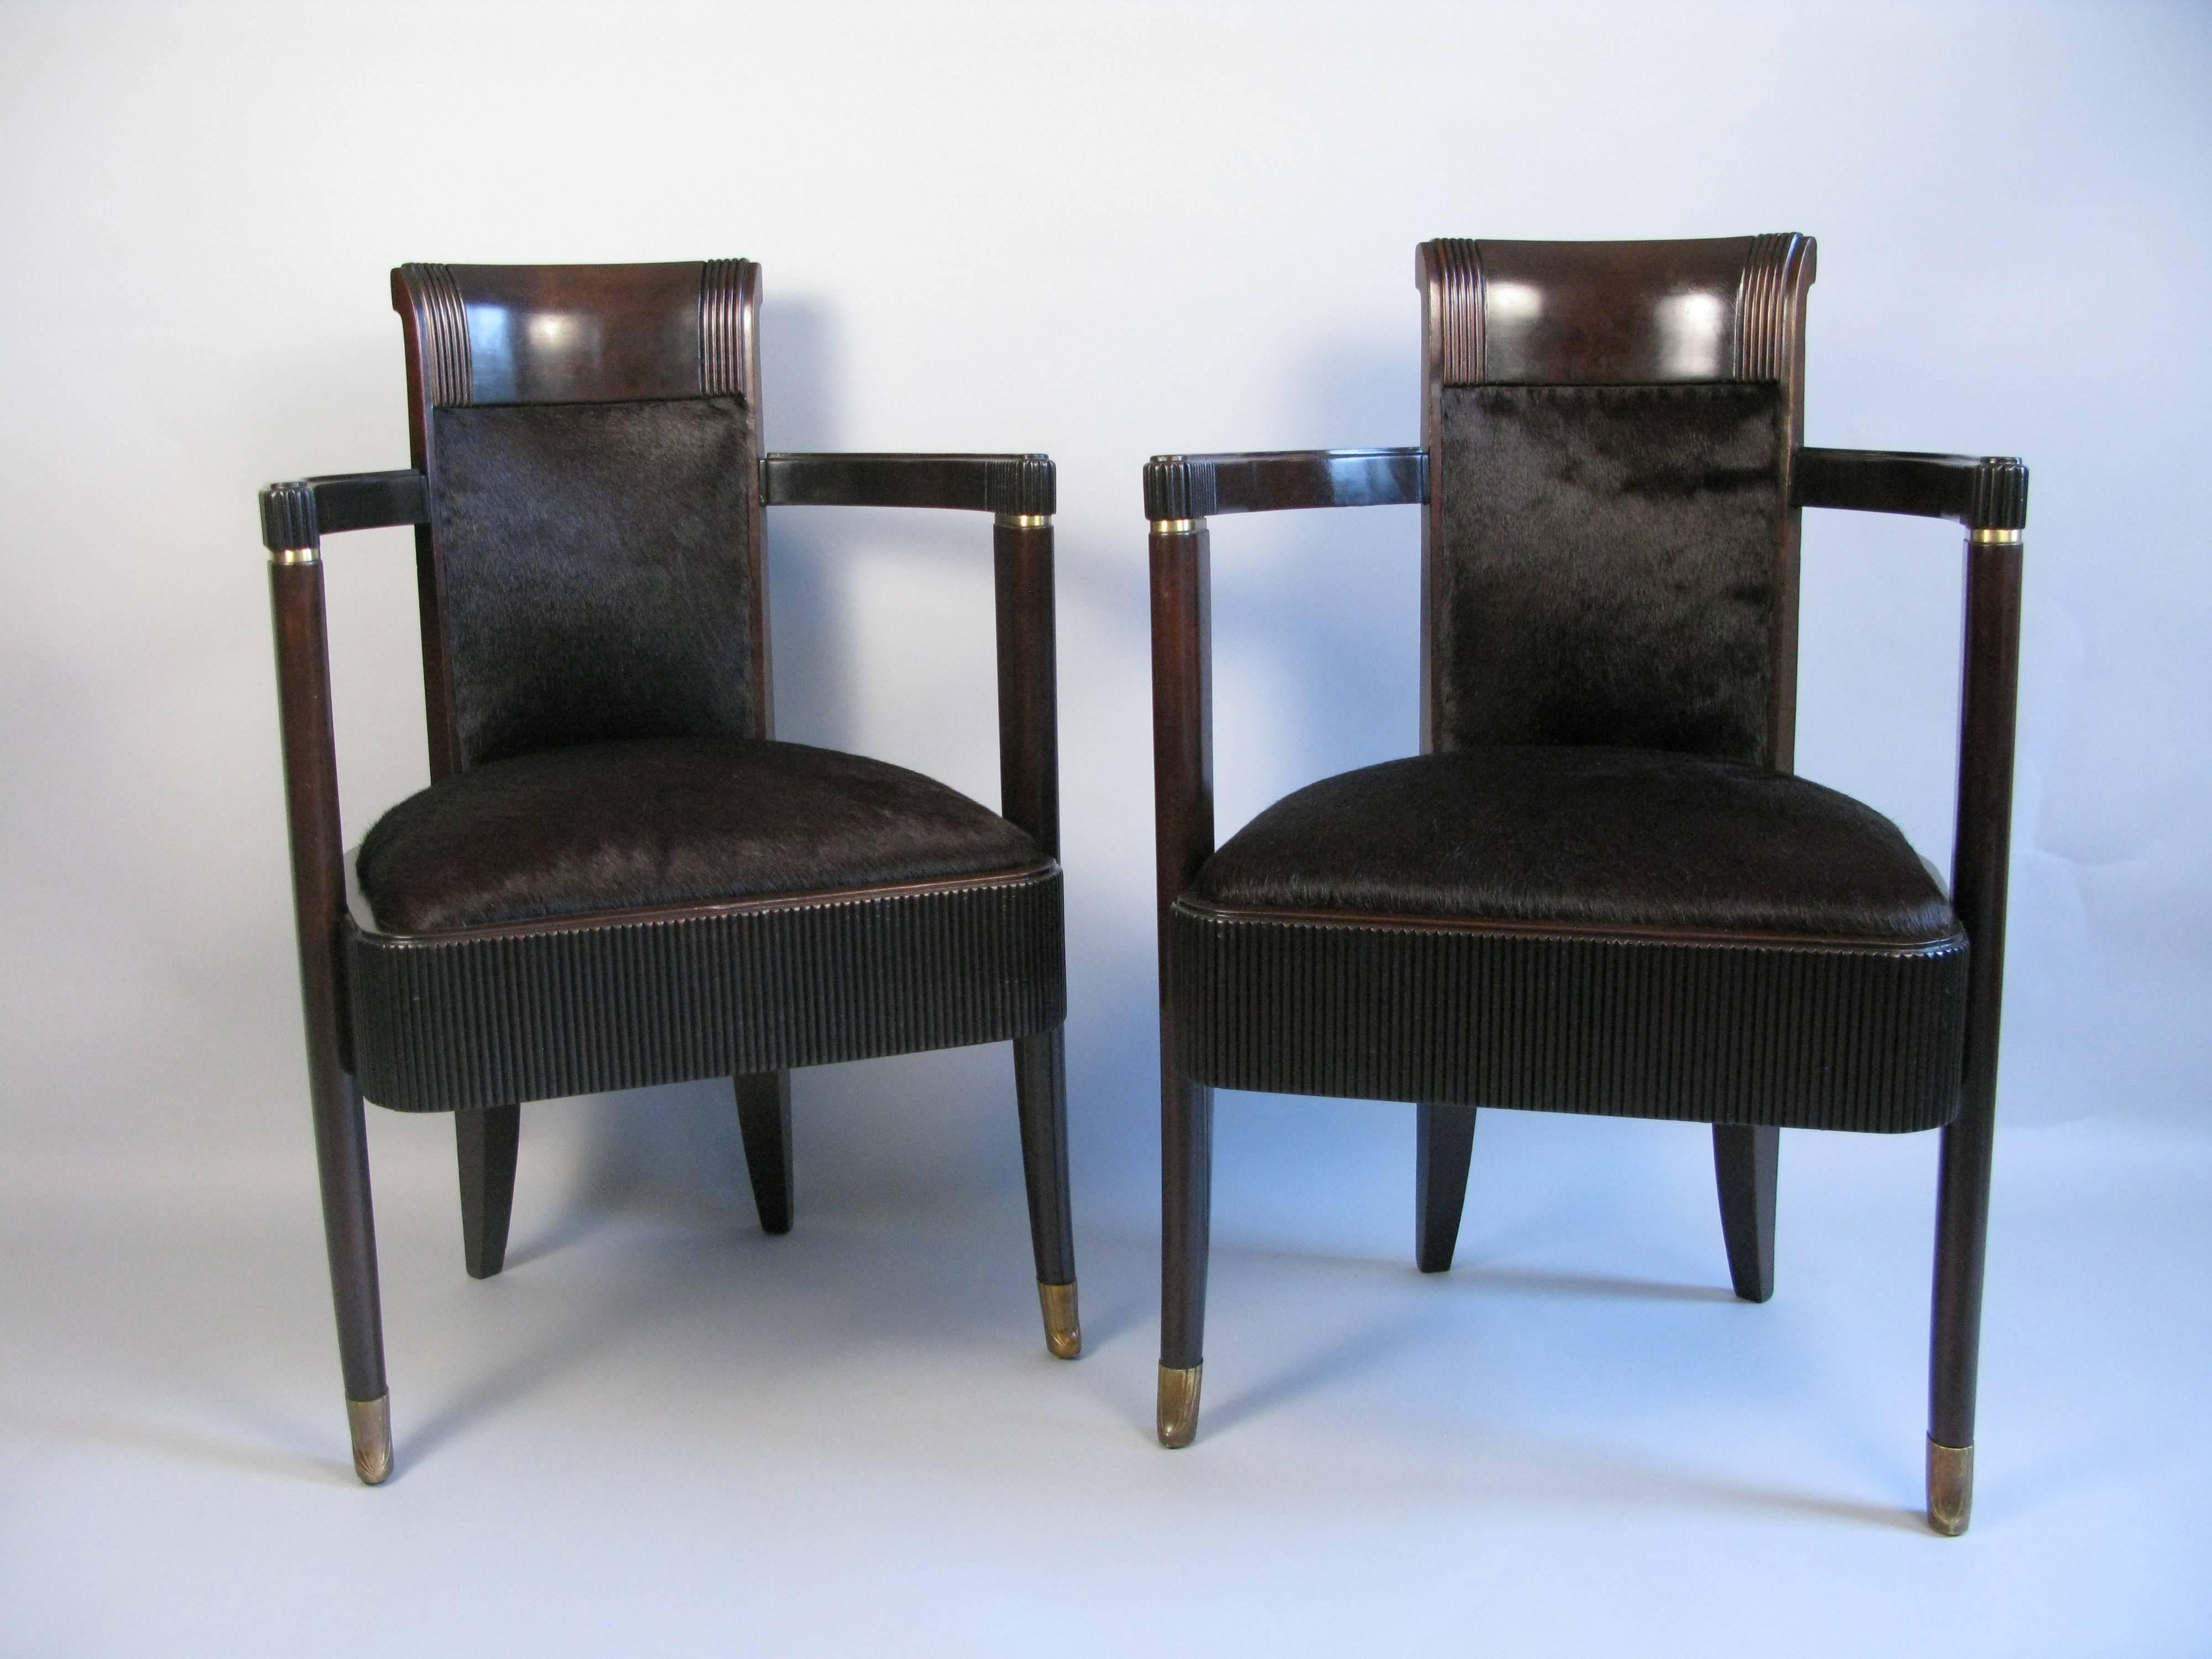 Meticulously restored pair of 1st class dining chairs from the French Luxury Liner S.S. Normandie (1935-1942). The luxury liner was the largest ever built. The ship was seized by the United States in 1942 and in the process of making it a troop